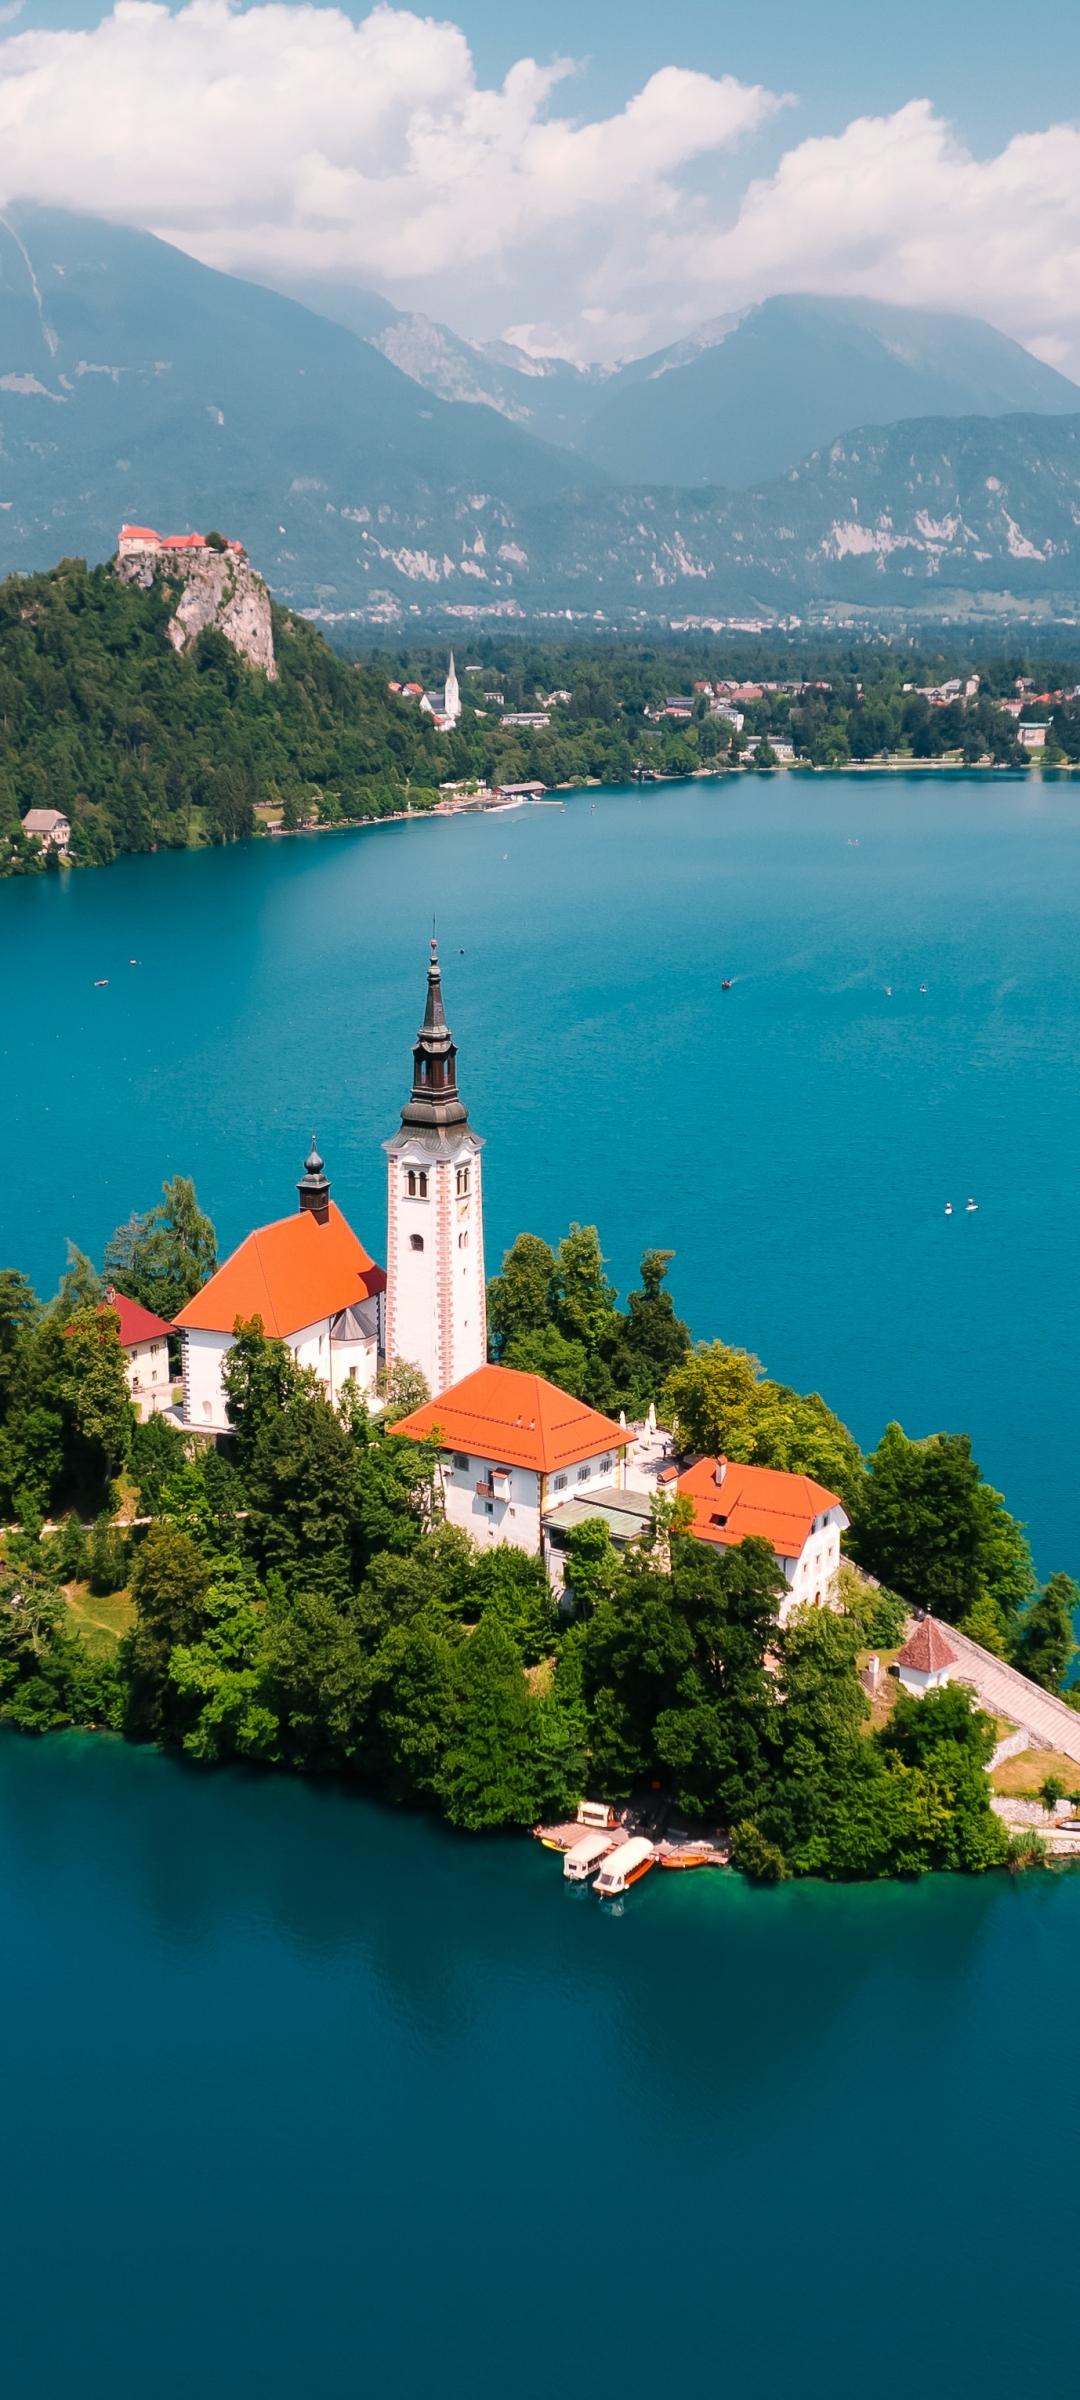 Bled, a Slovenian resort town in the foothills of the Julian Alps by Martin Katler